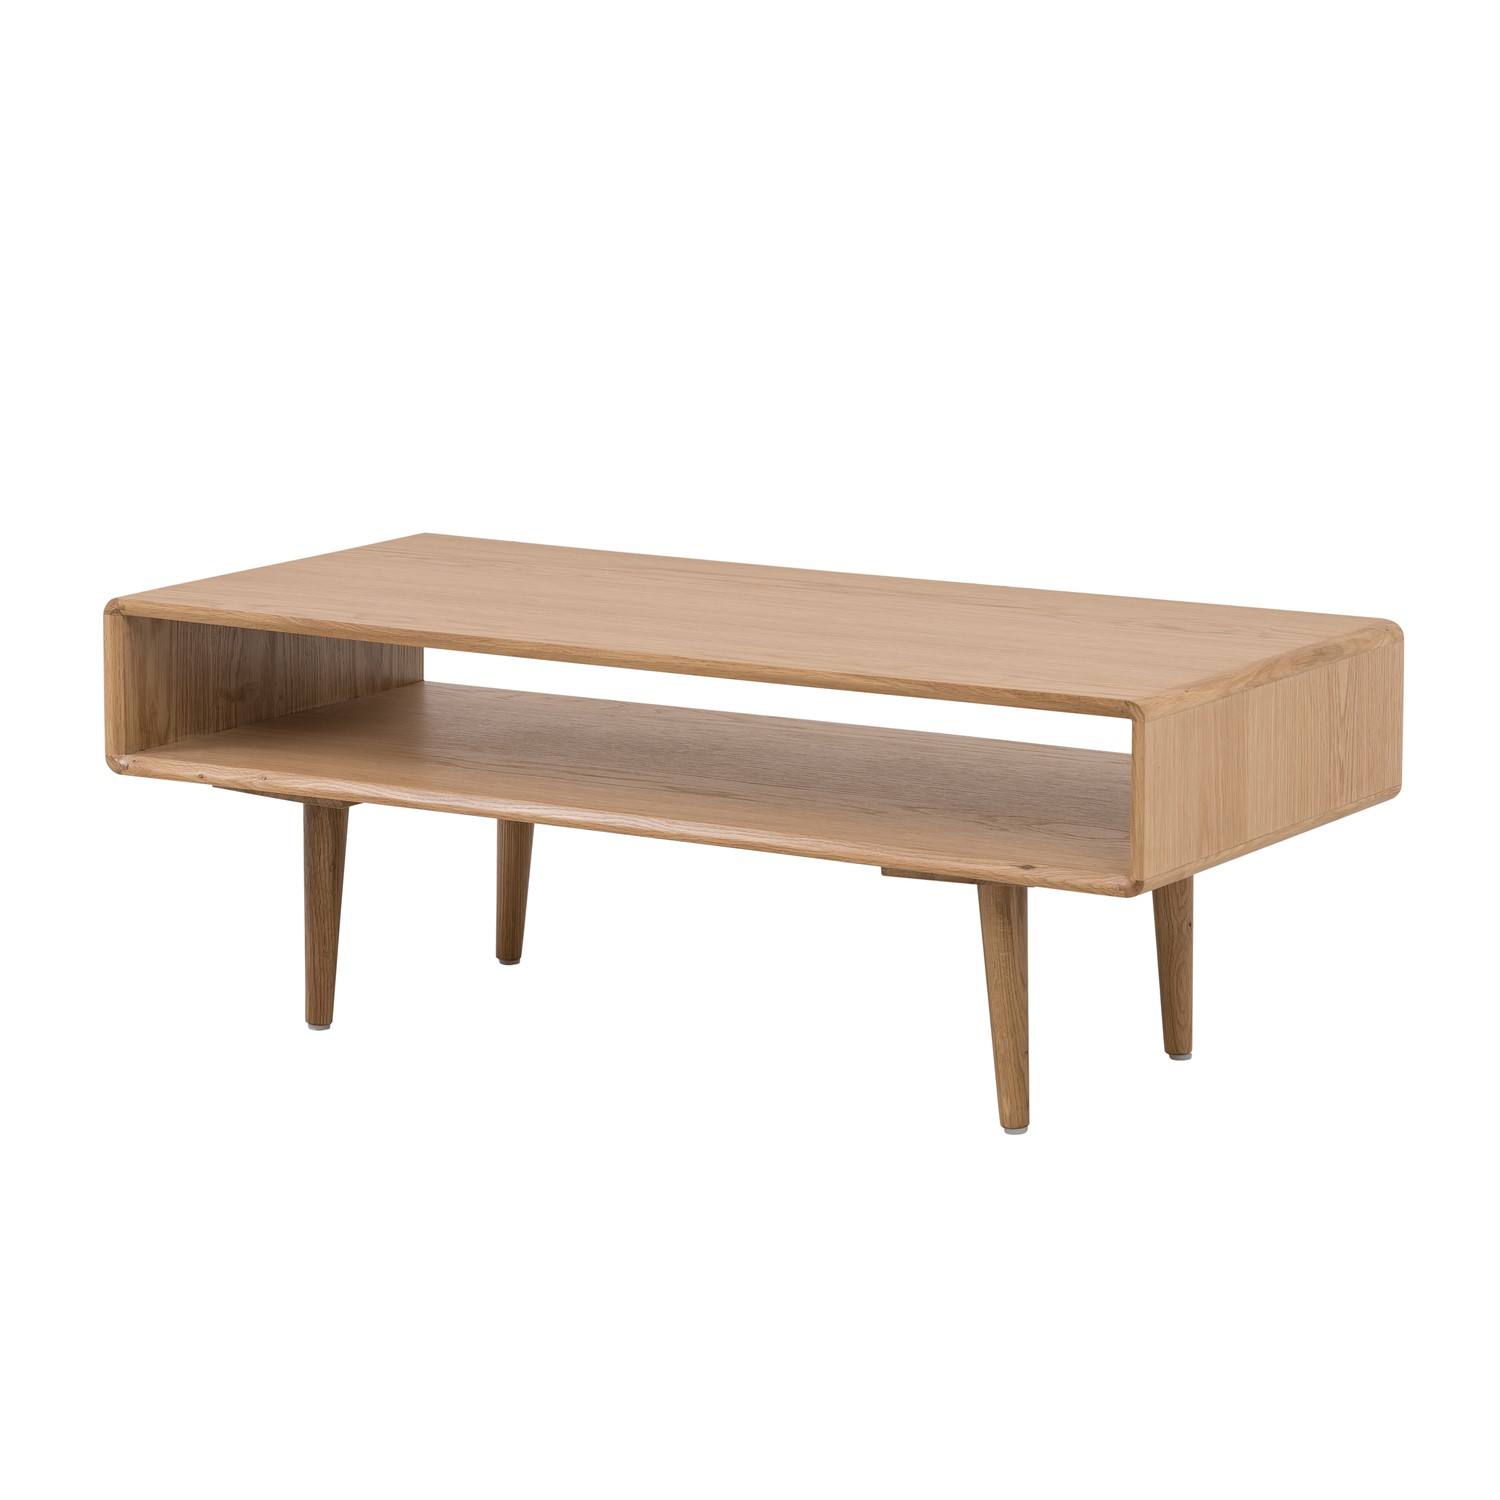 Photo of Large solid oak coffee table with storage shelf - marny